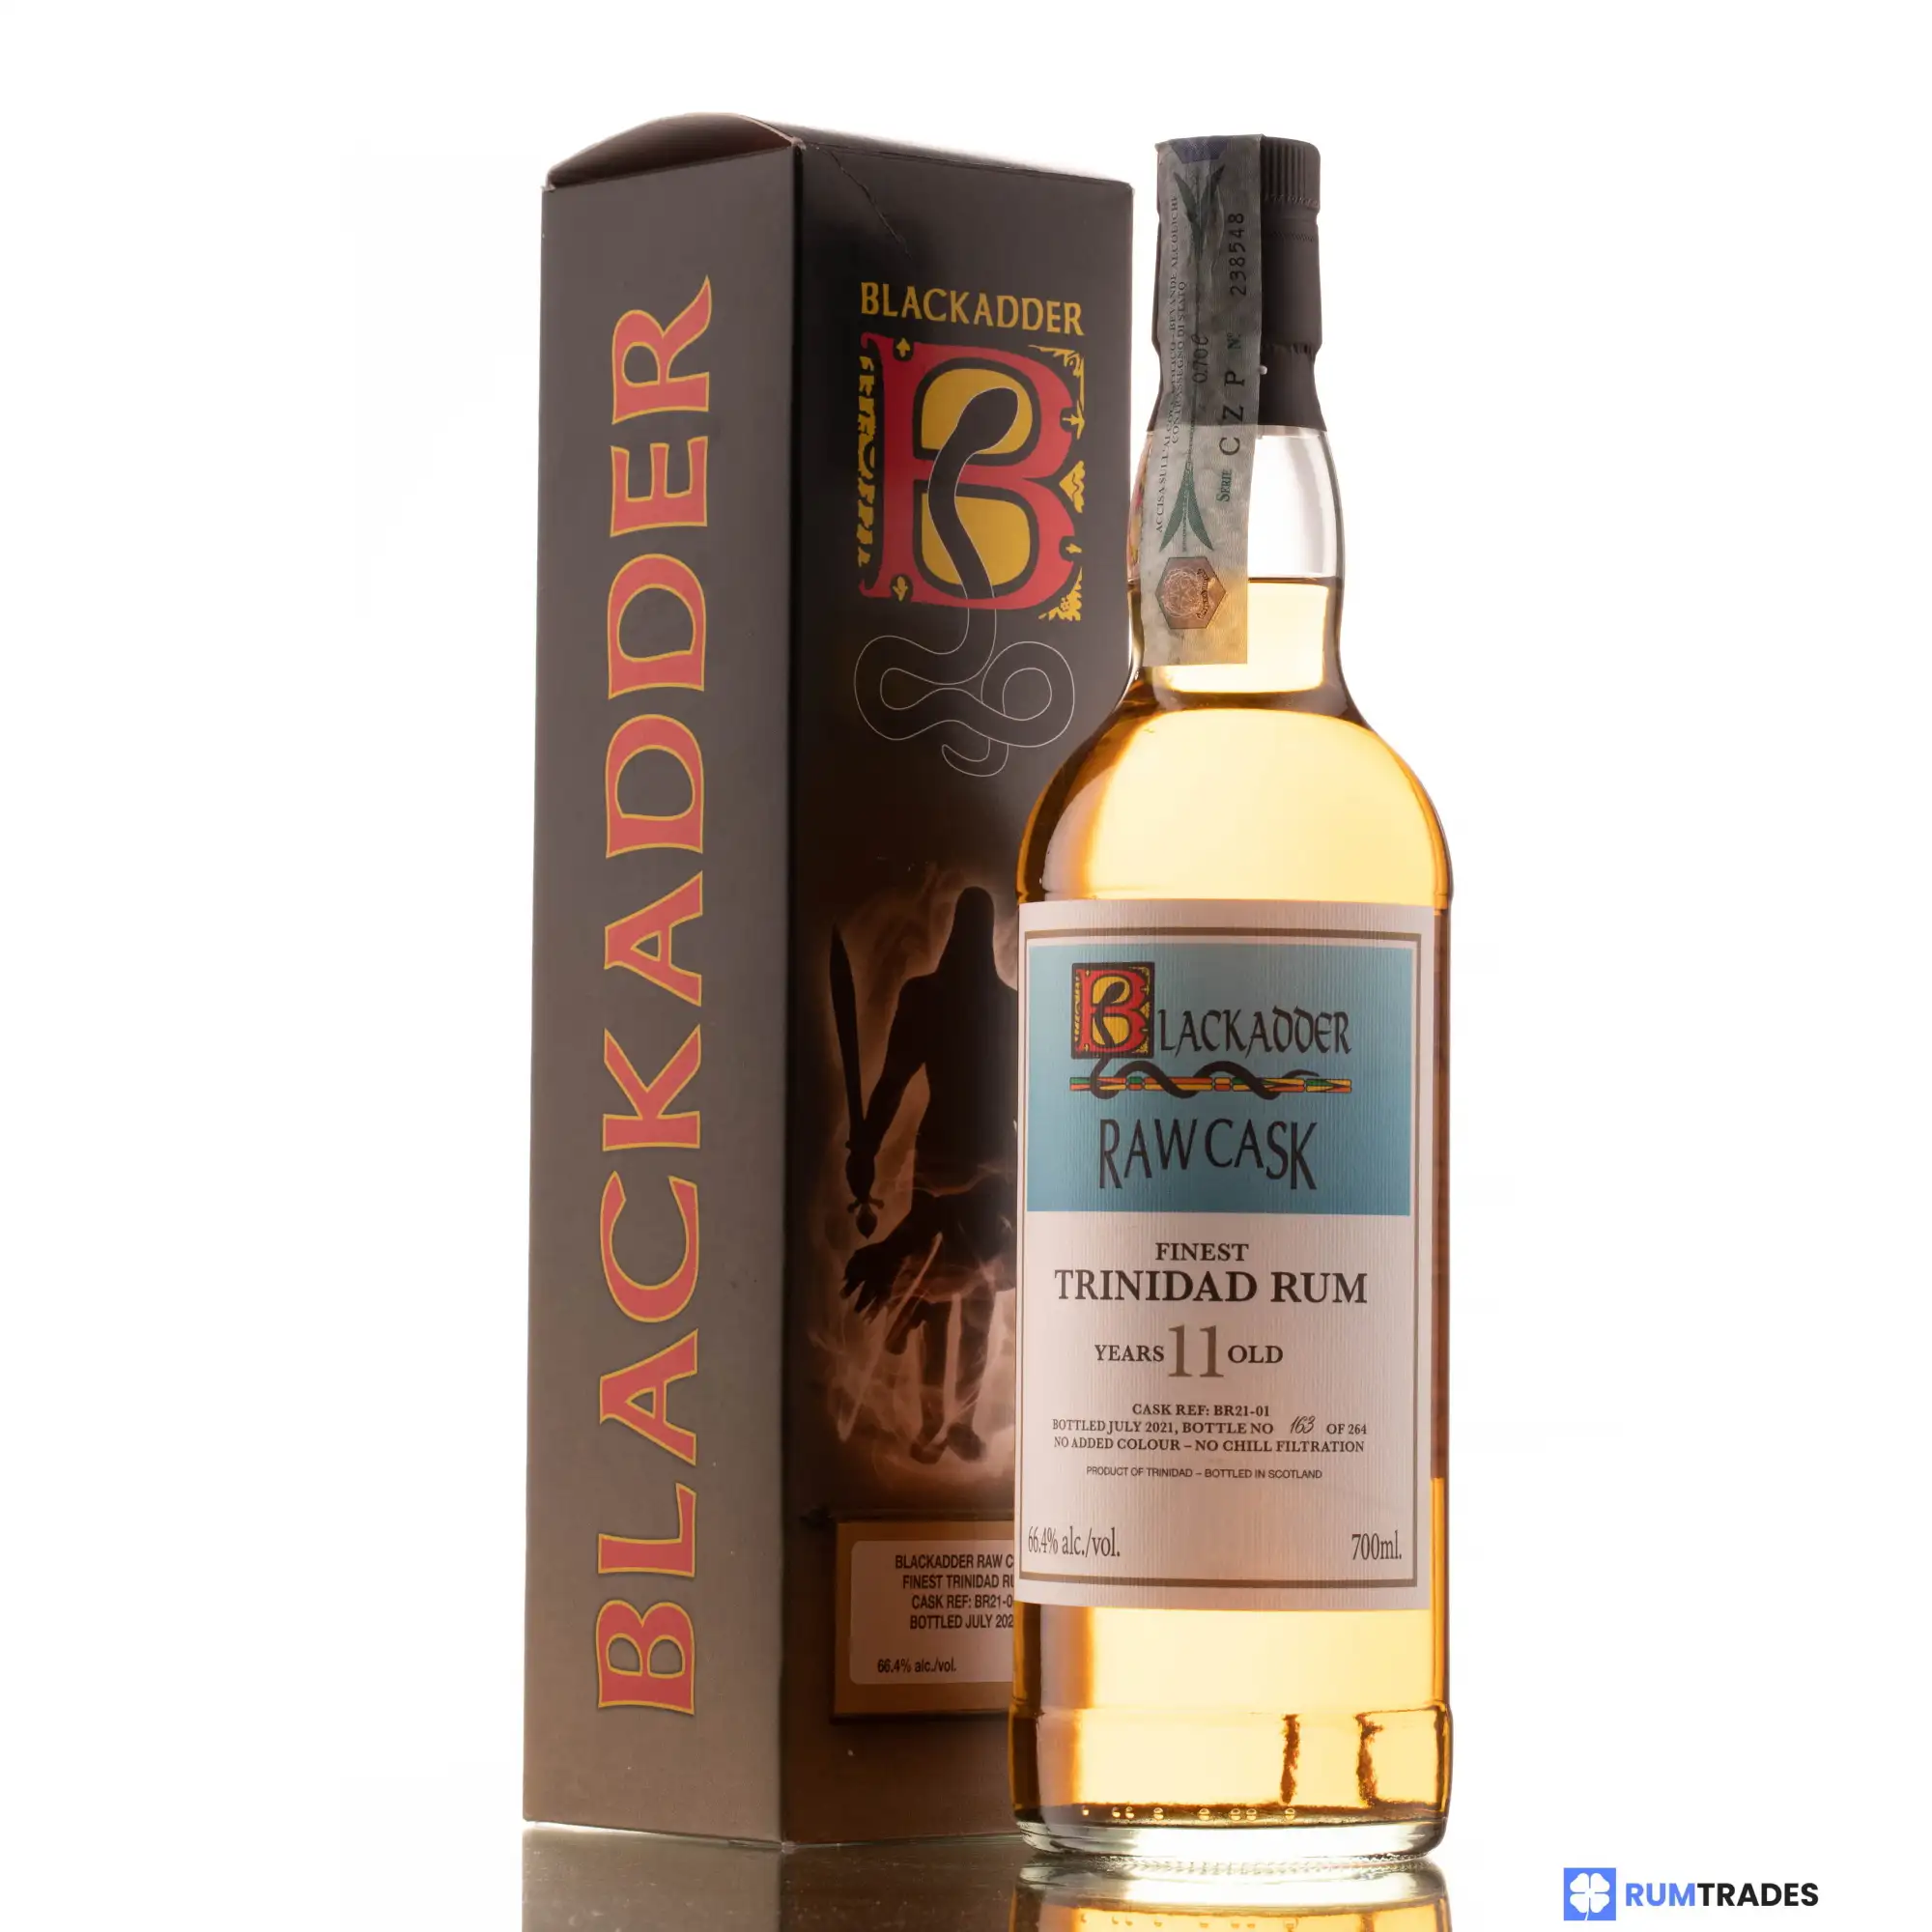 Image of the front of the bottle of the rum Raw Cask Rum